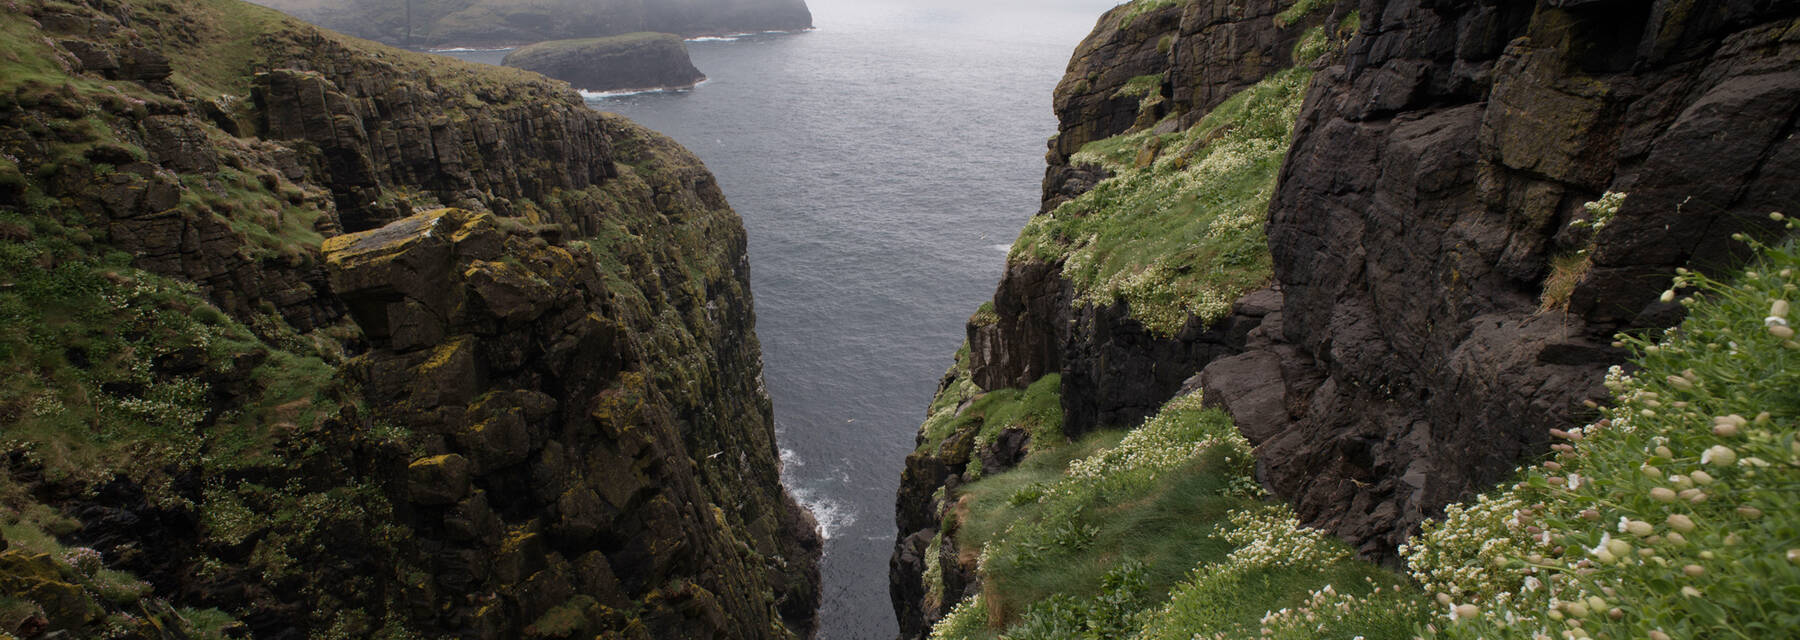 Mingulay cliffs plunging to the sea with low cloud